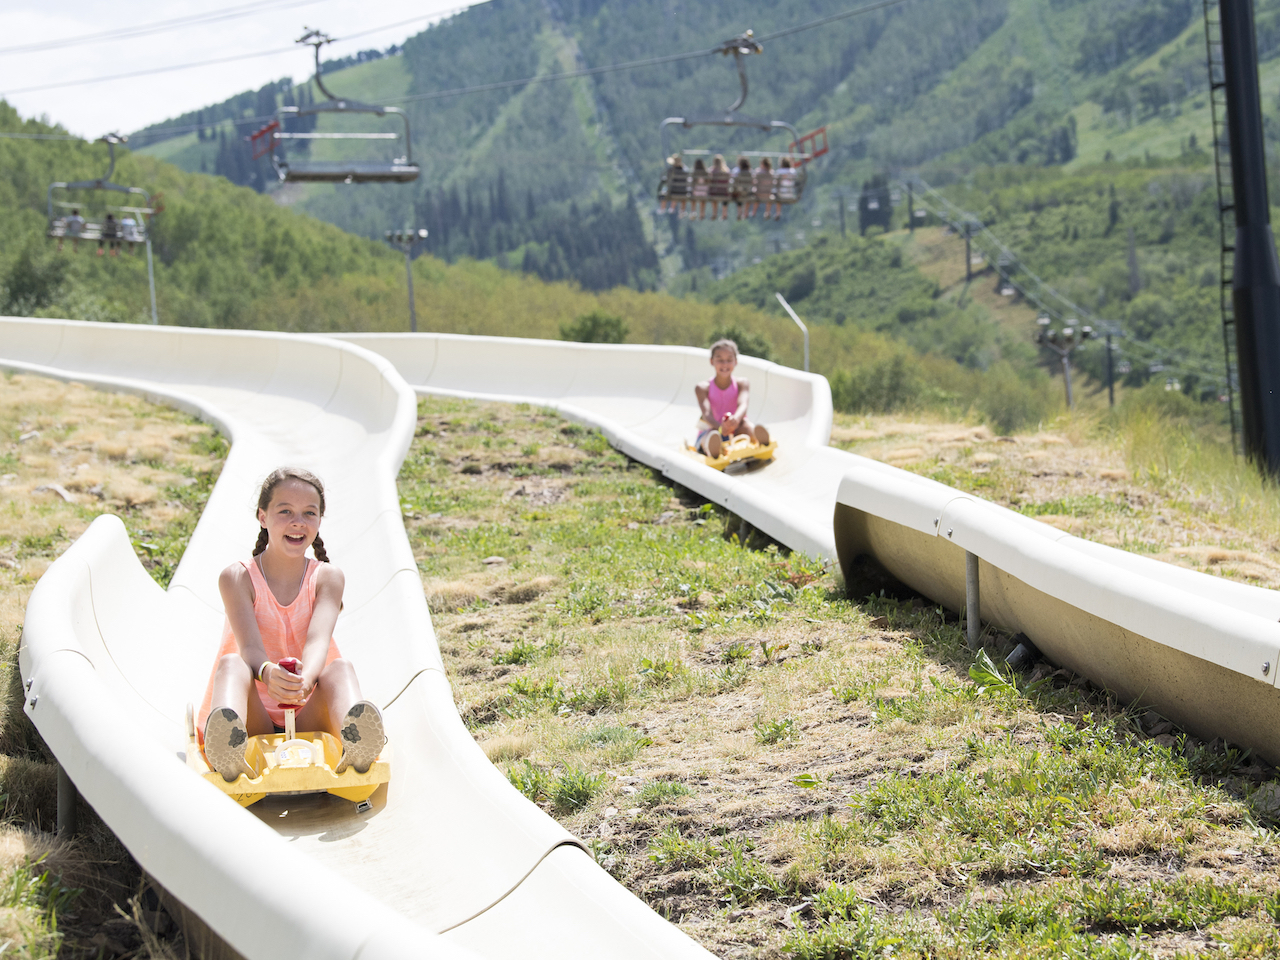 kids tubing down a mountain in summer